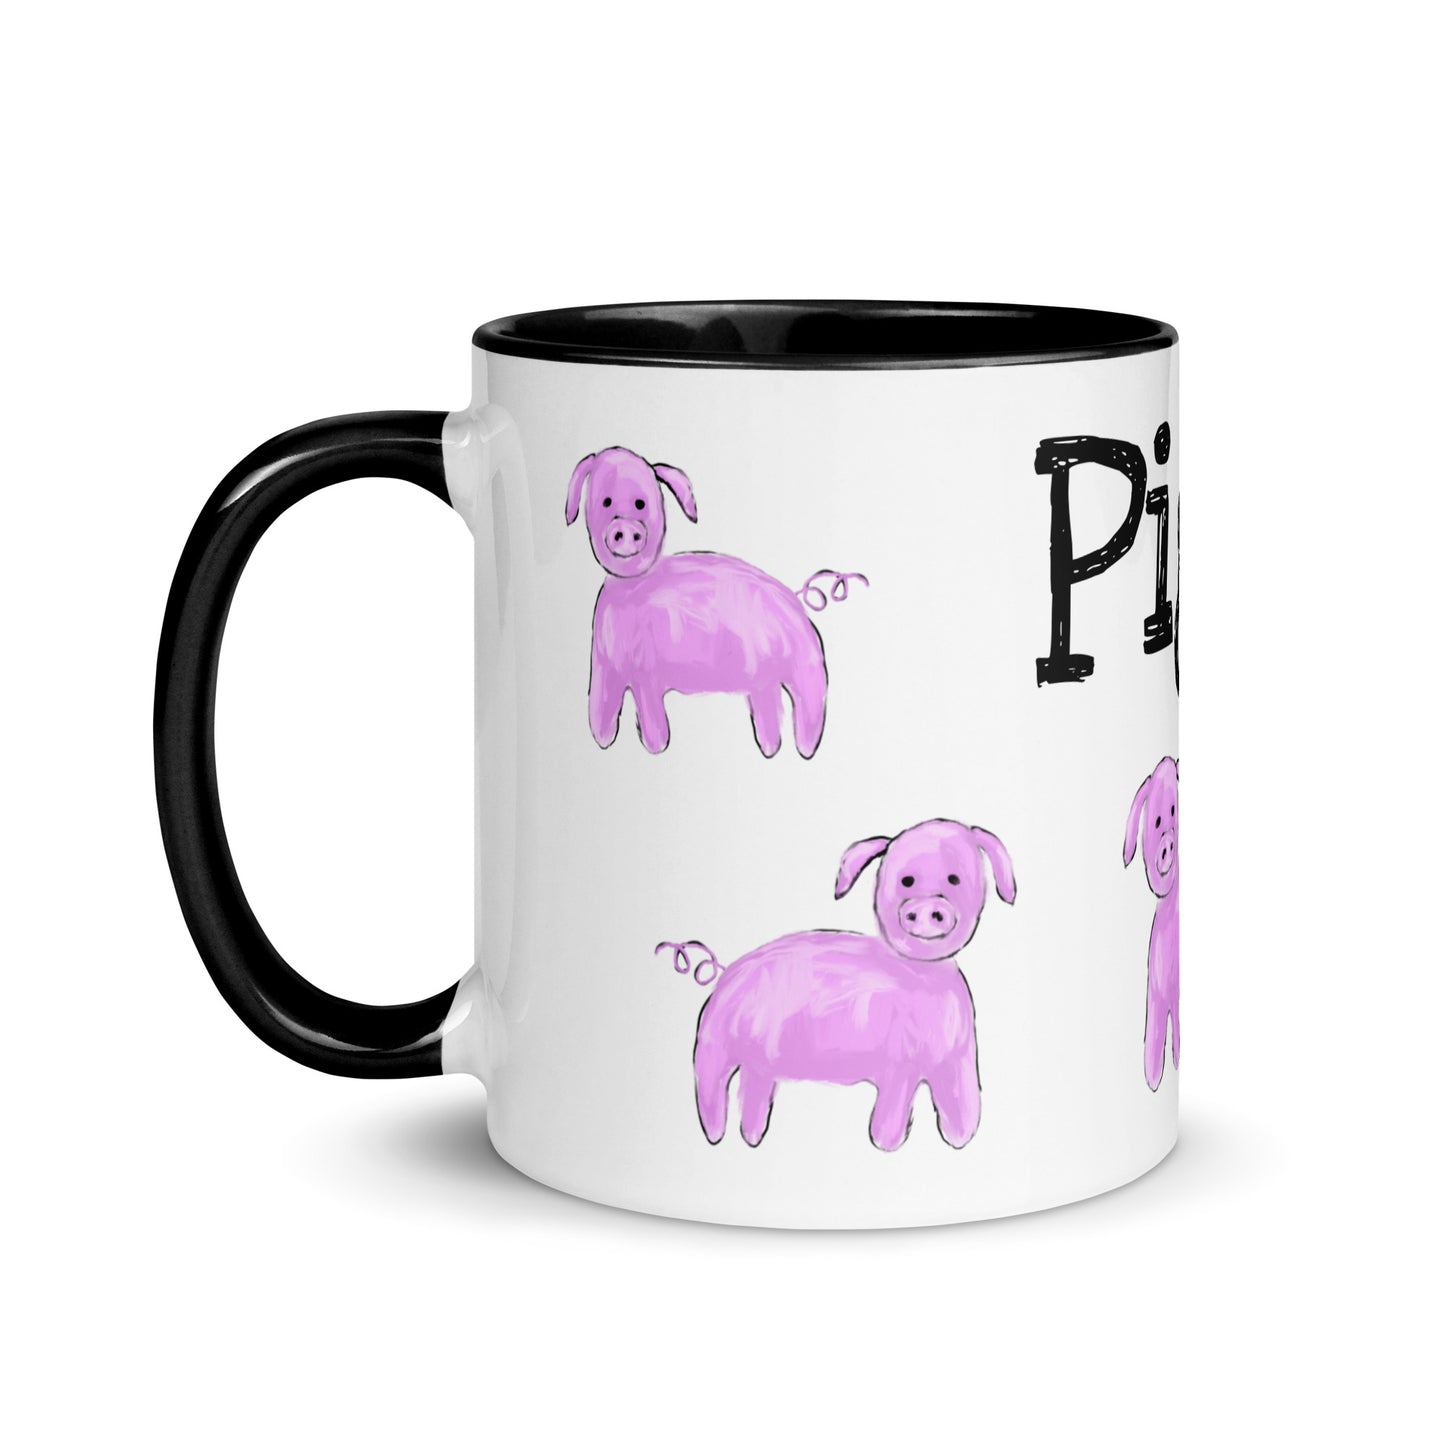 Pigs By Cindy Motley Mug with Color Inside